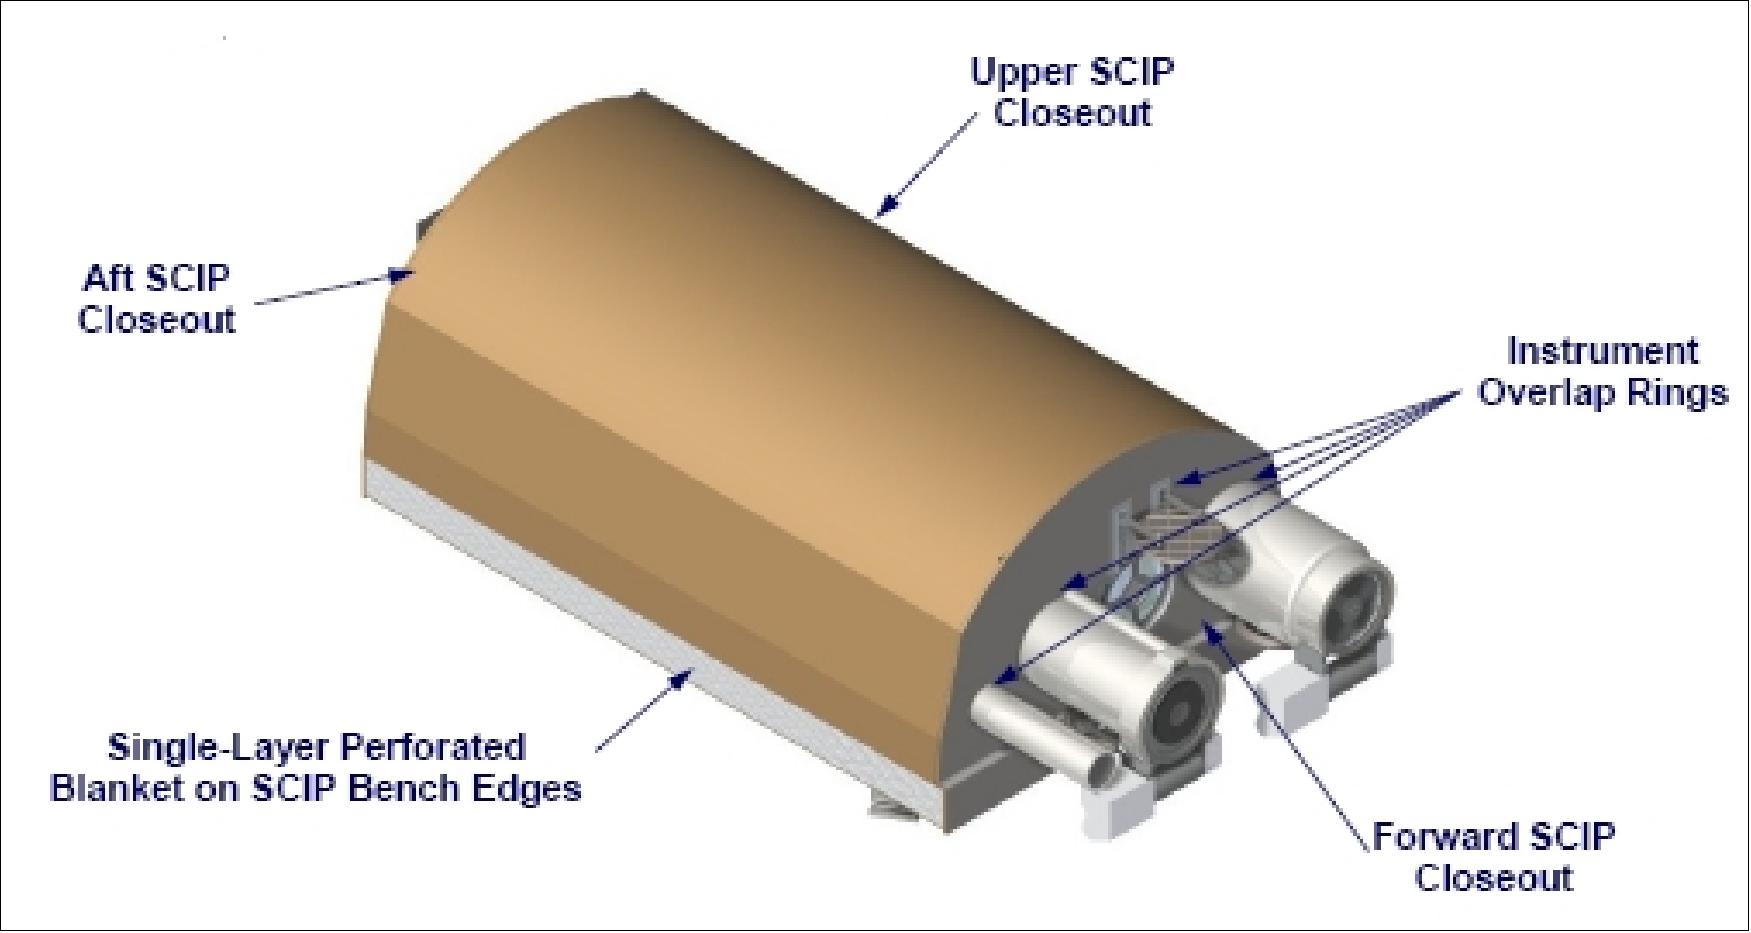 Figure 42: Top view of SECCHI-SCIP assembly with thermal tent (image credit: NRL)